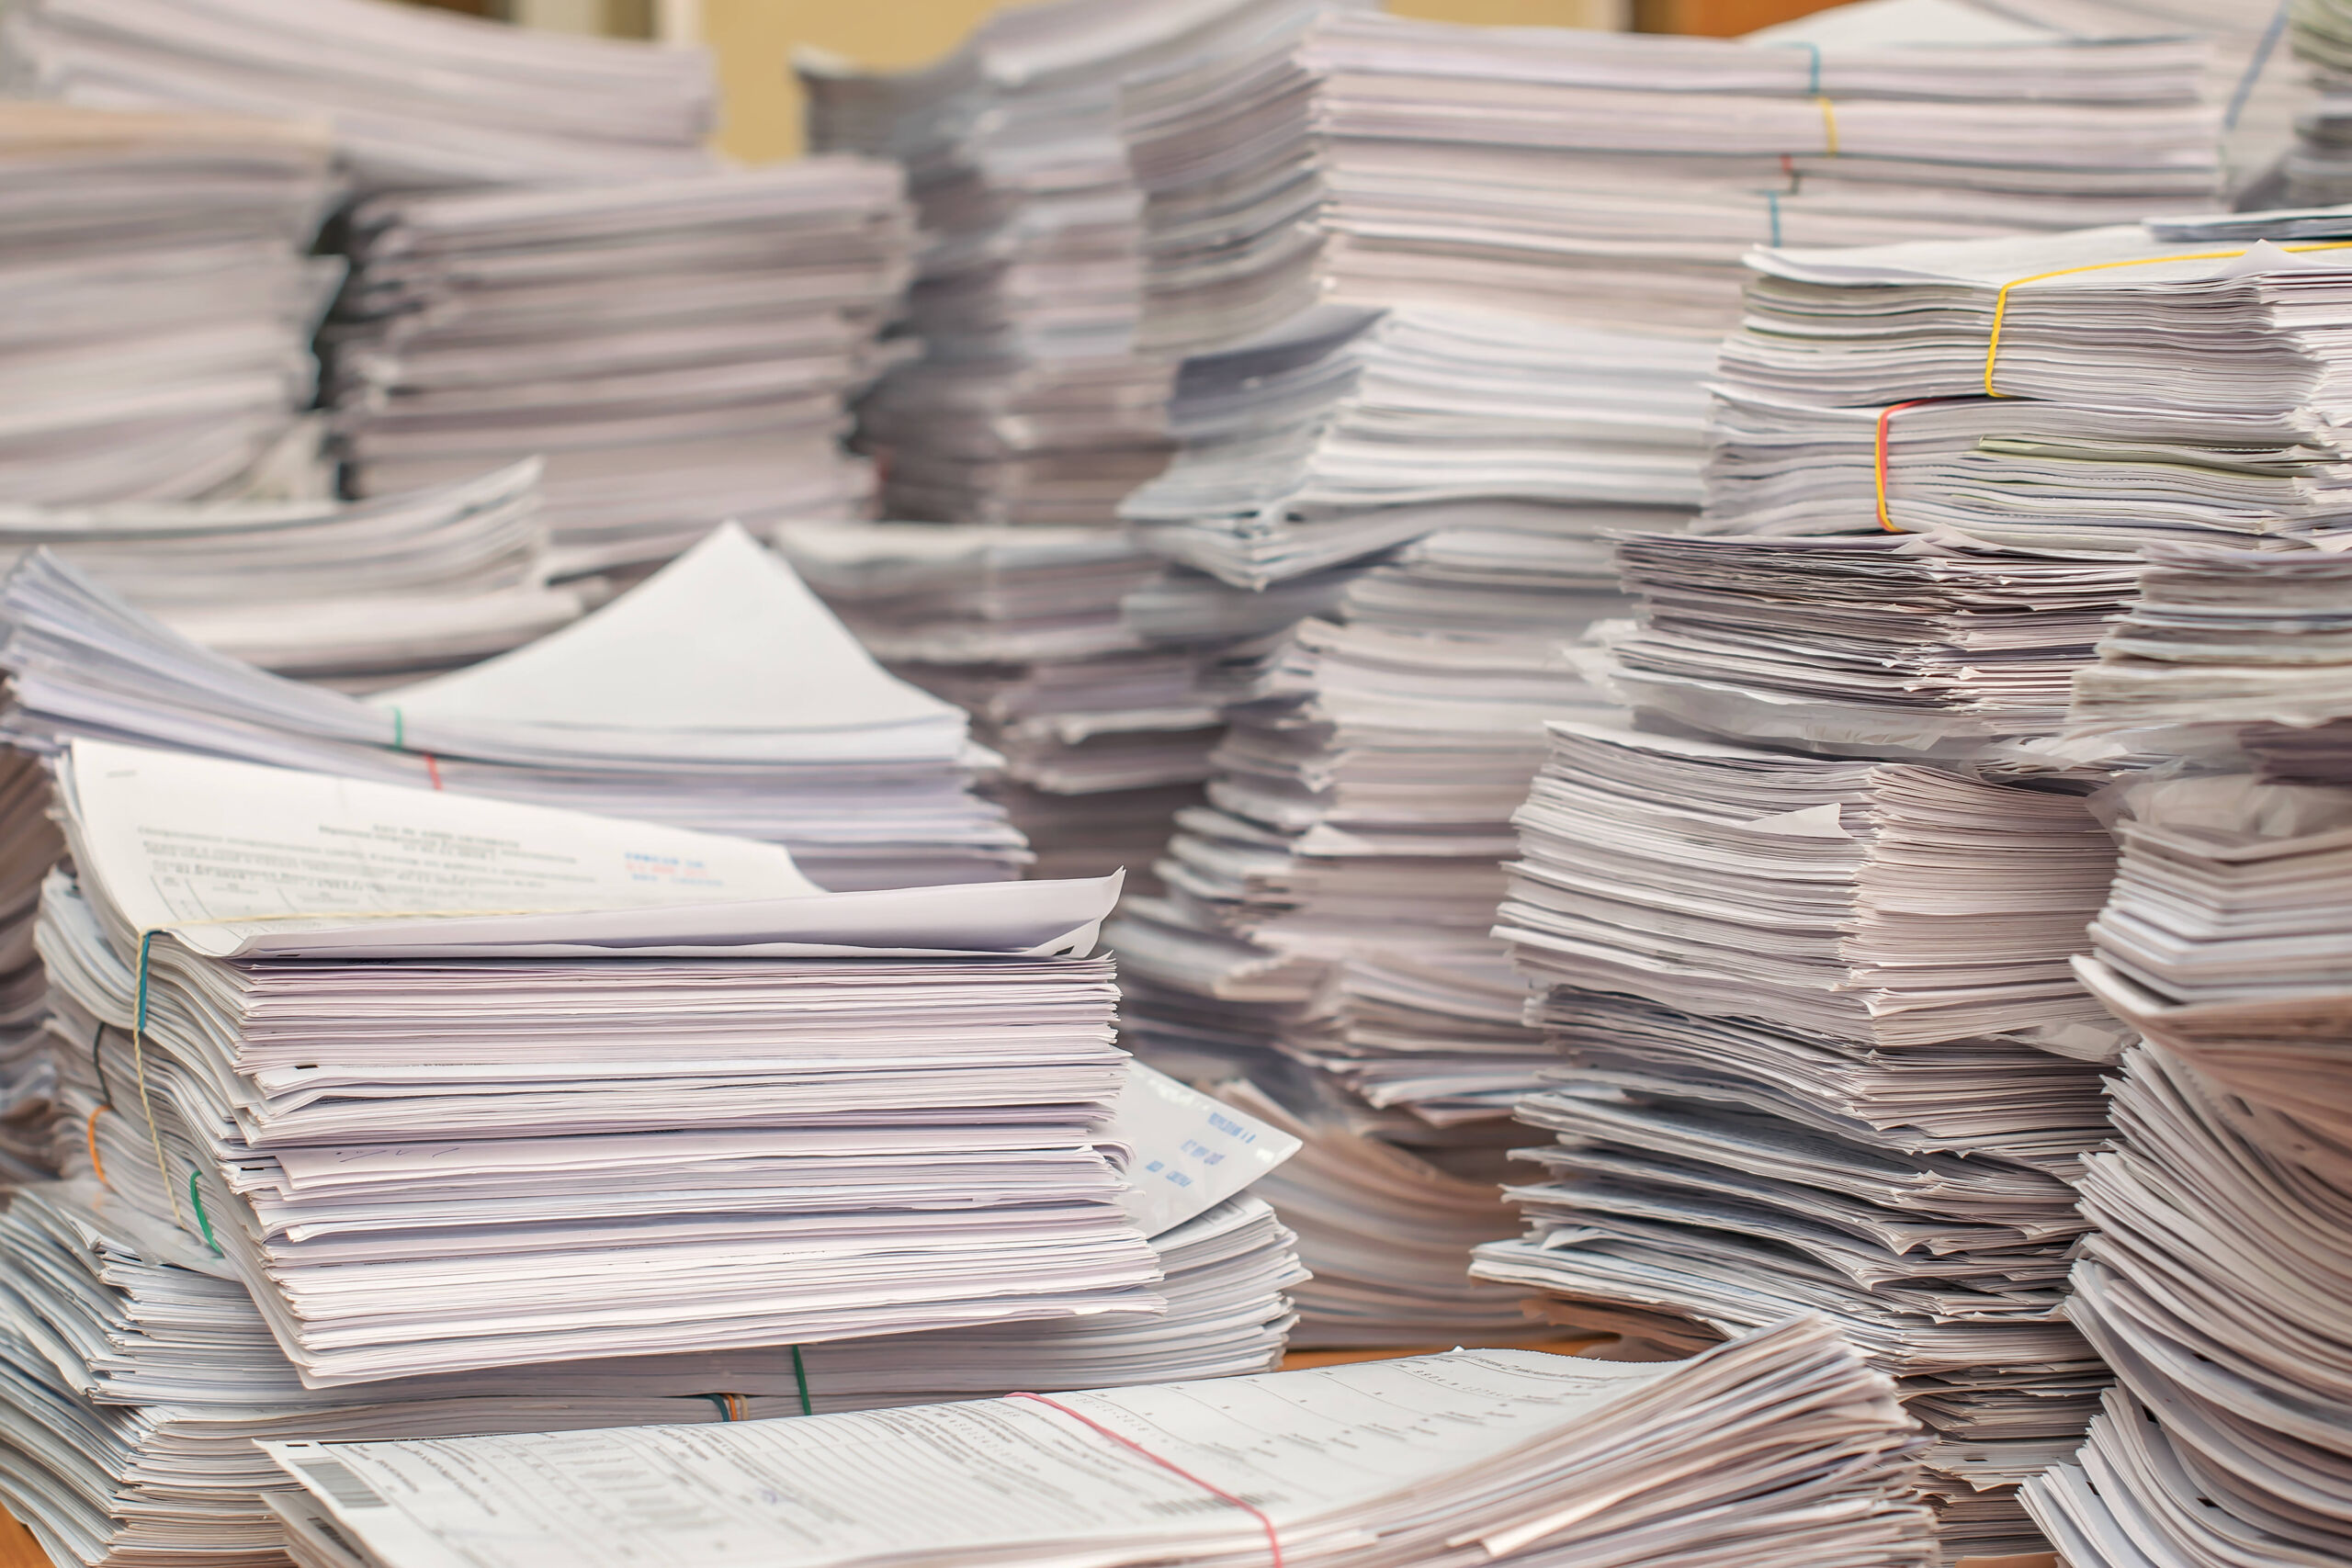 Several high stacks of paper documents on an office desk.